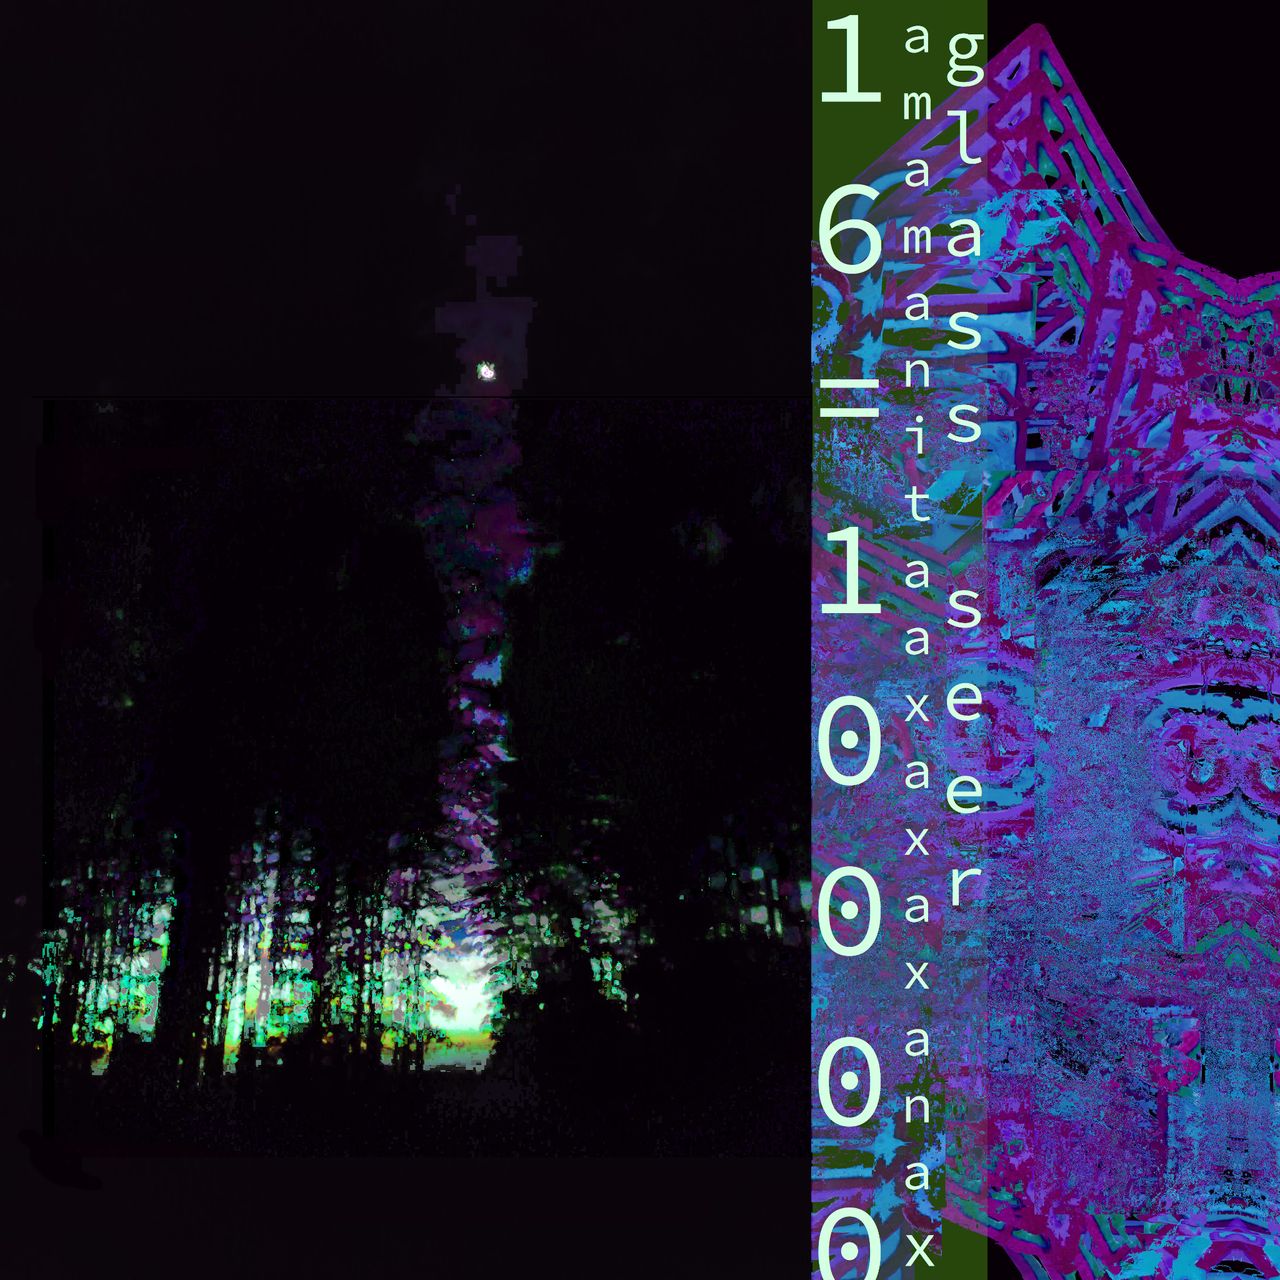 A picture of the night sky in a forest with the full moon visible, hue-shifted to blue green colour. The right third has a glitched AAGS logo, with the album name and artist name overlaid over the top written top to bottom, left to right.